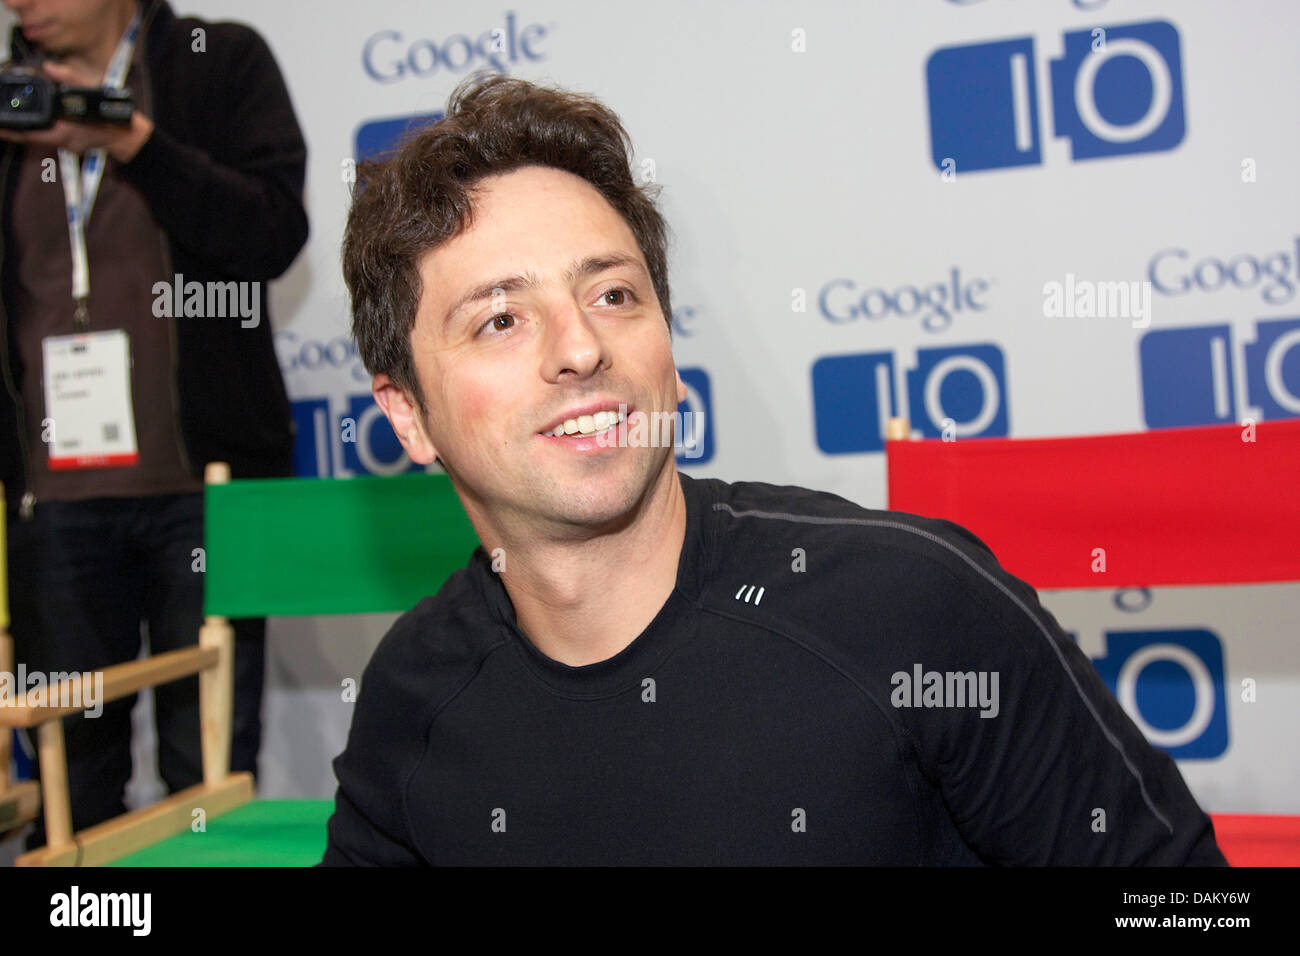 Google co-founder Sergey Brin smiles at the Google development conference I/O in San Francisco, USA, 11 May 2011. Google wants to re-invent the computer. It uses Chrome OS against Microsoft and for the first time offers notebooks with the web operating system in Germany. Photo: Christoph Dernbach Stock Photo